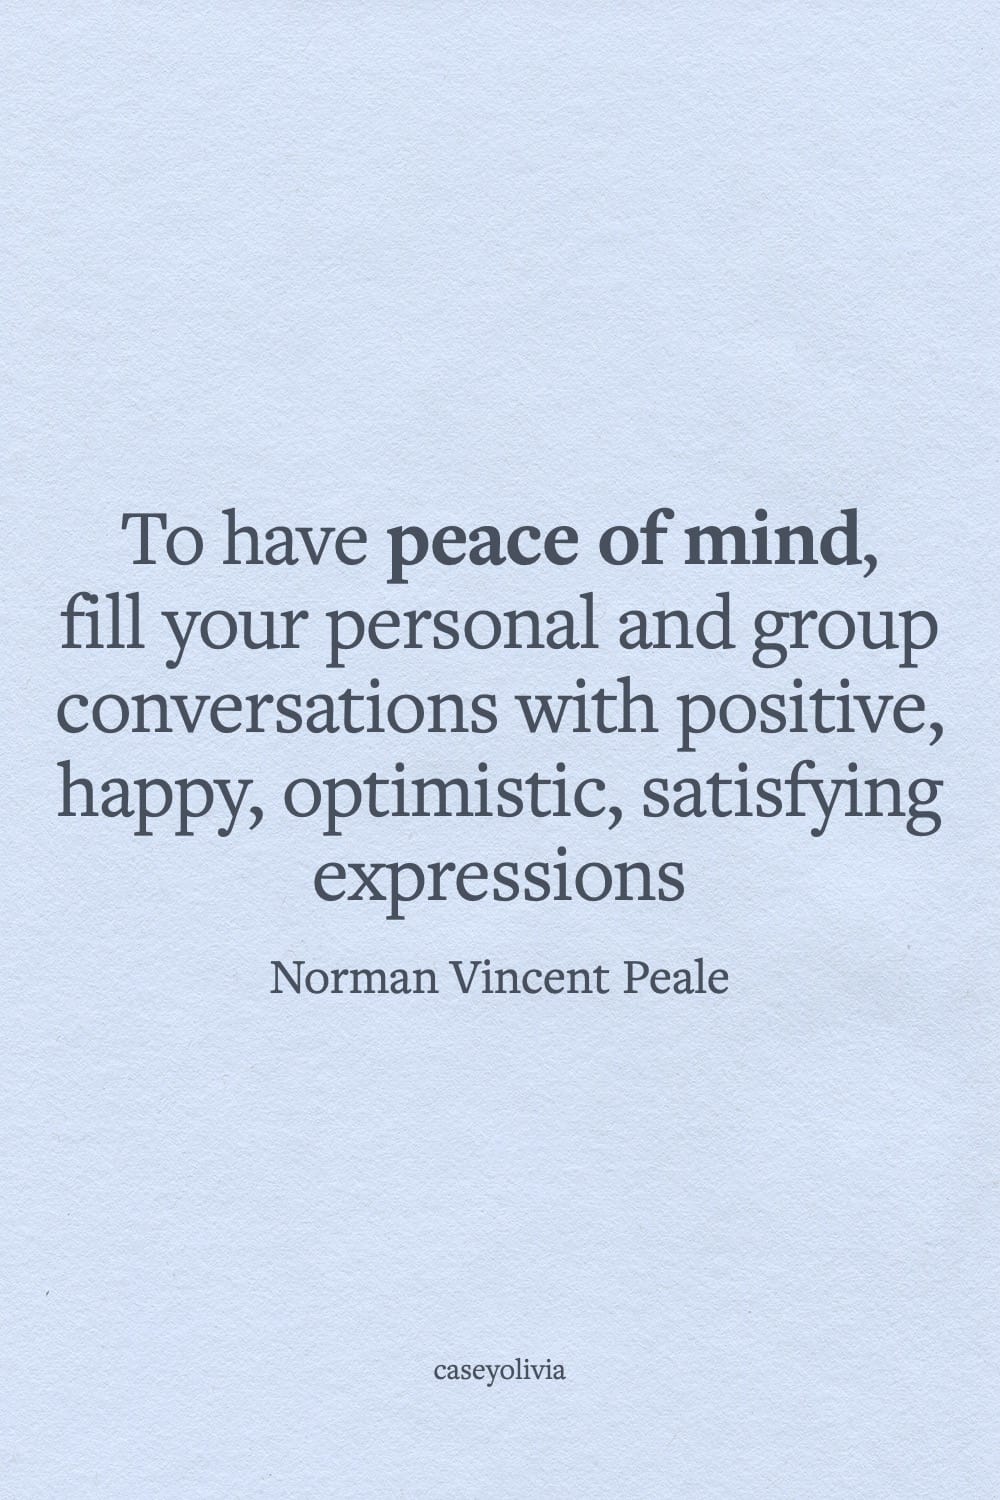 norman vincent peale peace of mind inspirational quotation